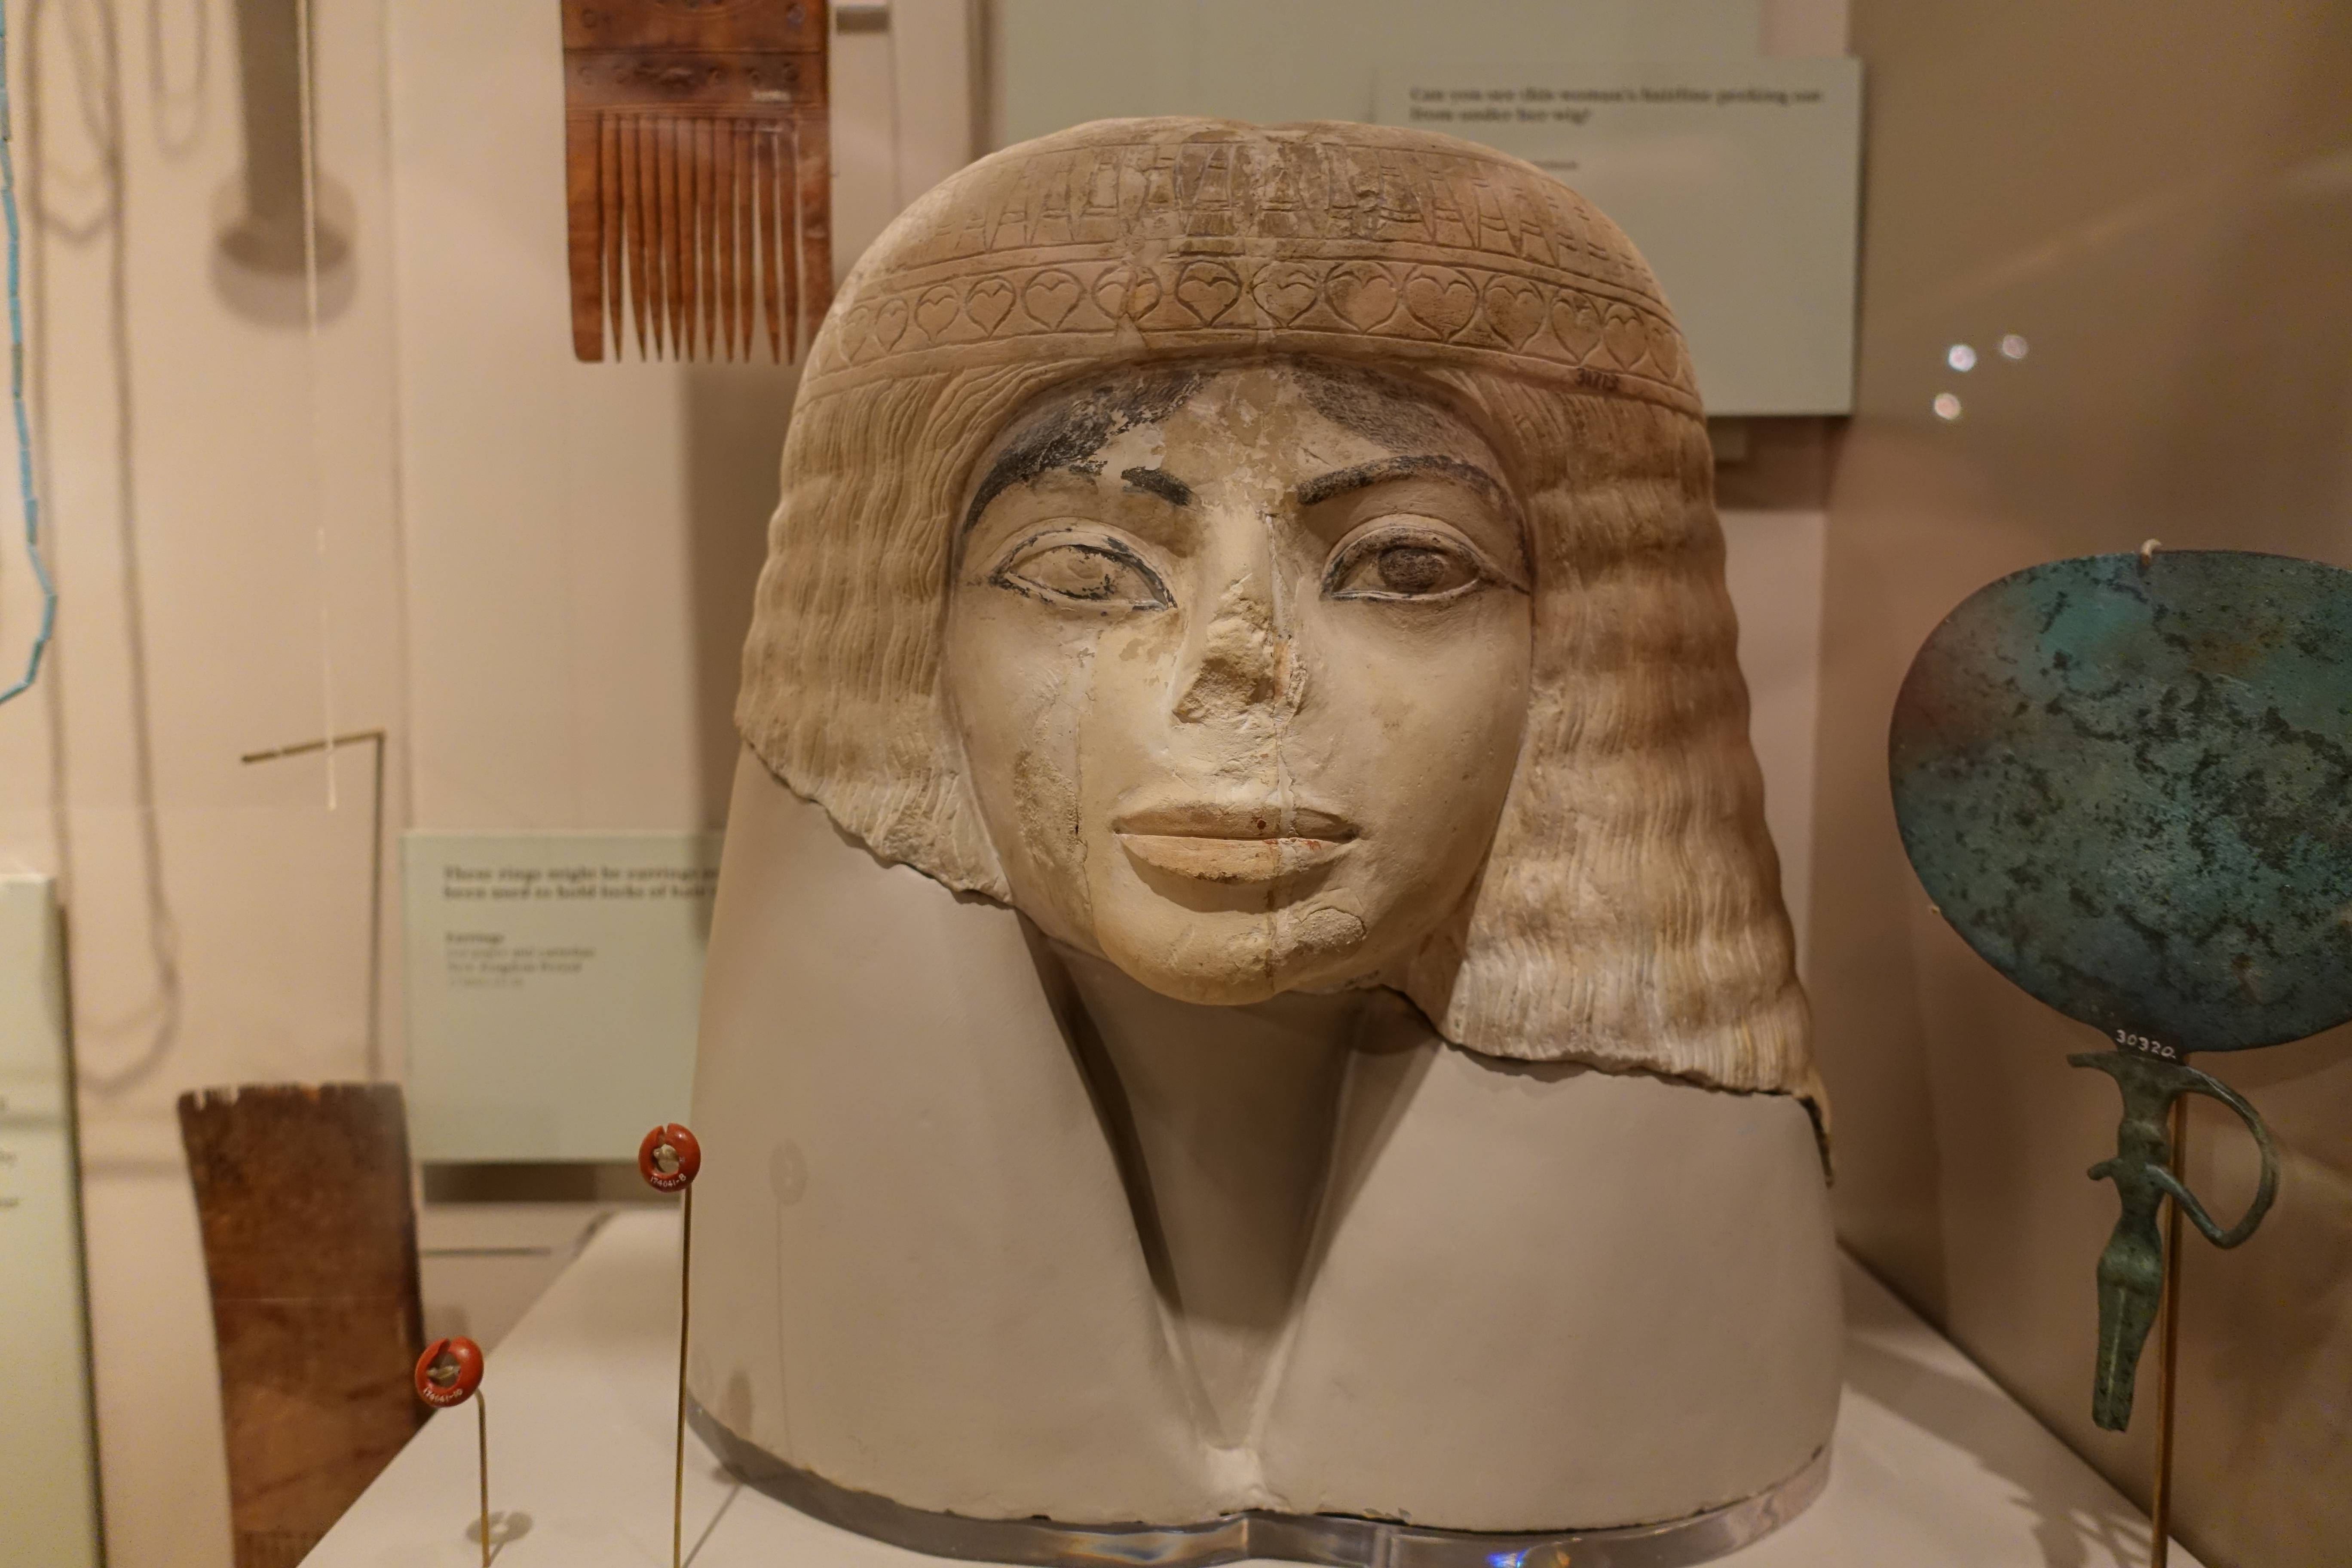 This 3,000 year old Egyptian bust looks mildly like Michael Jackson.